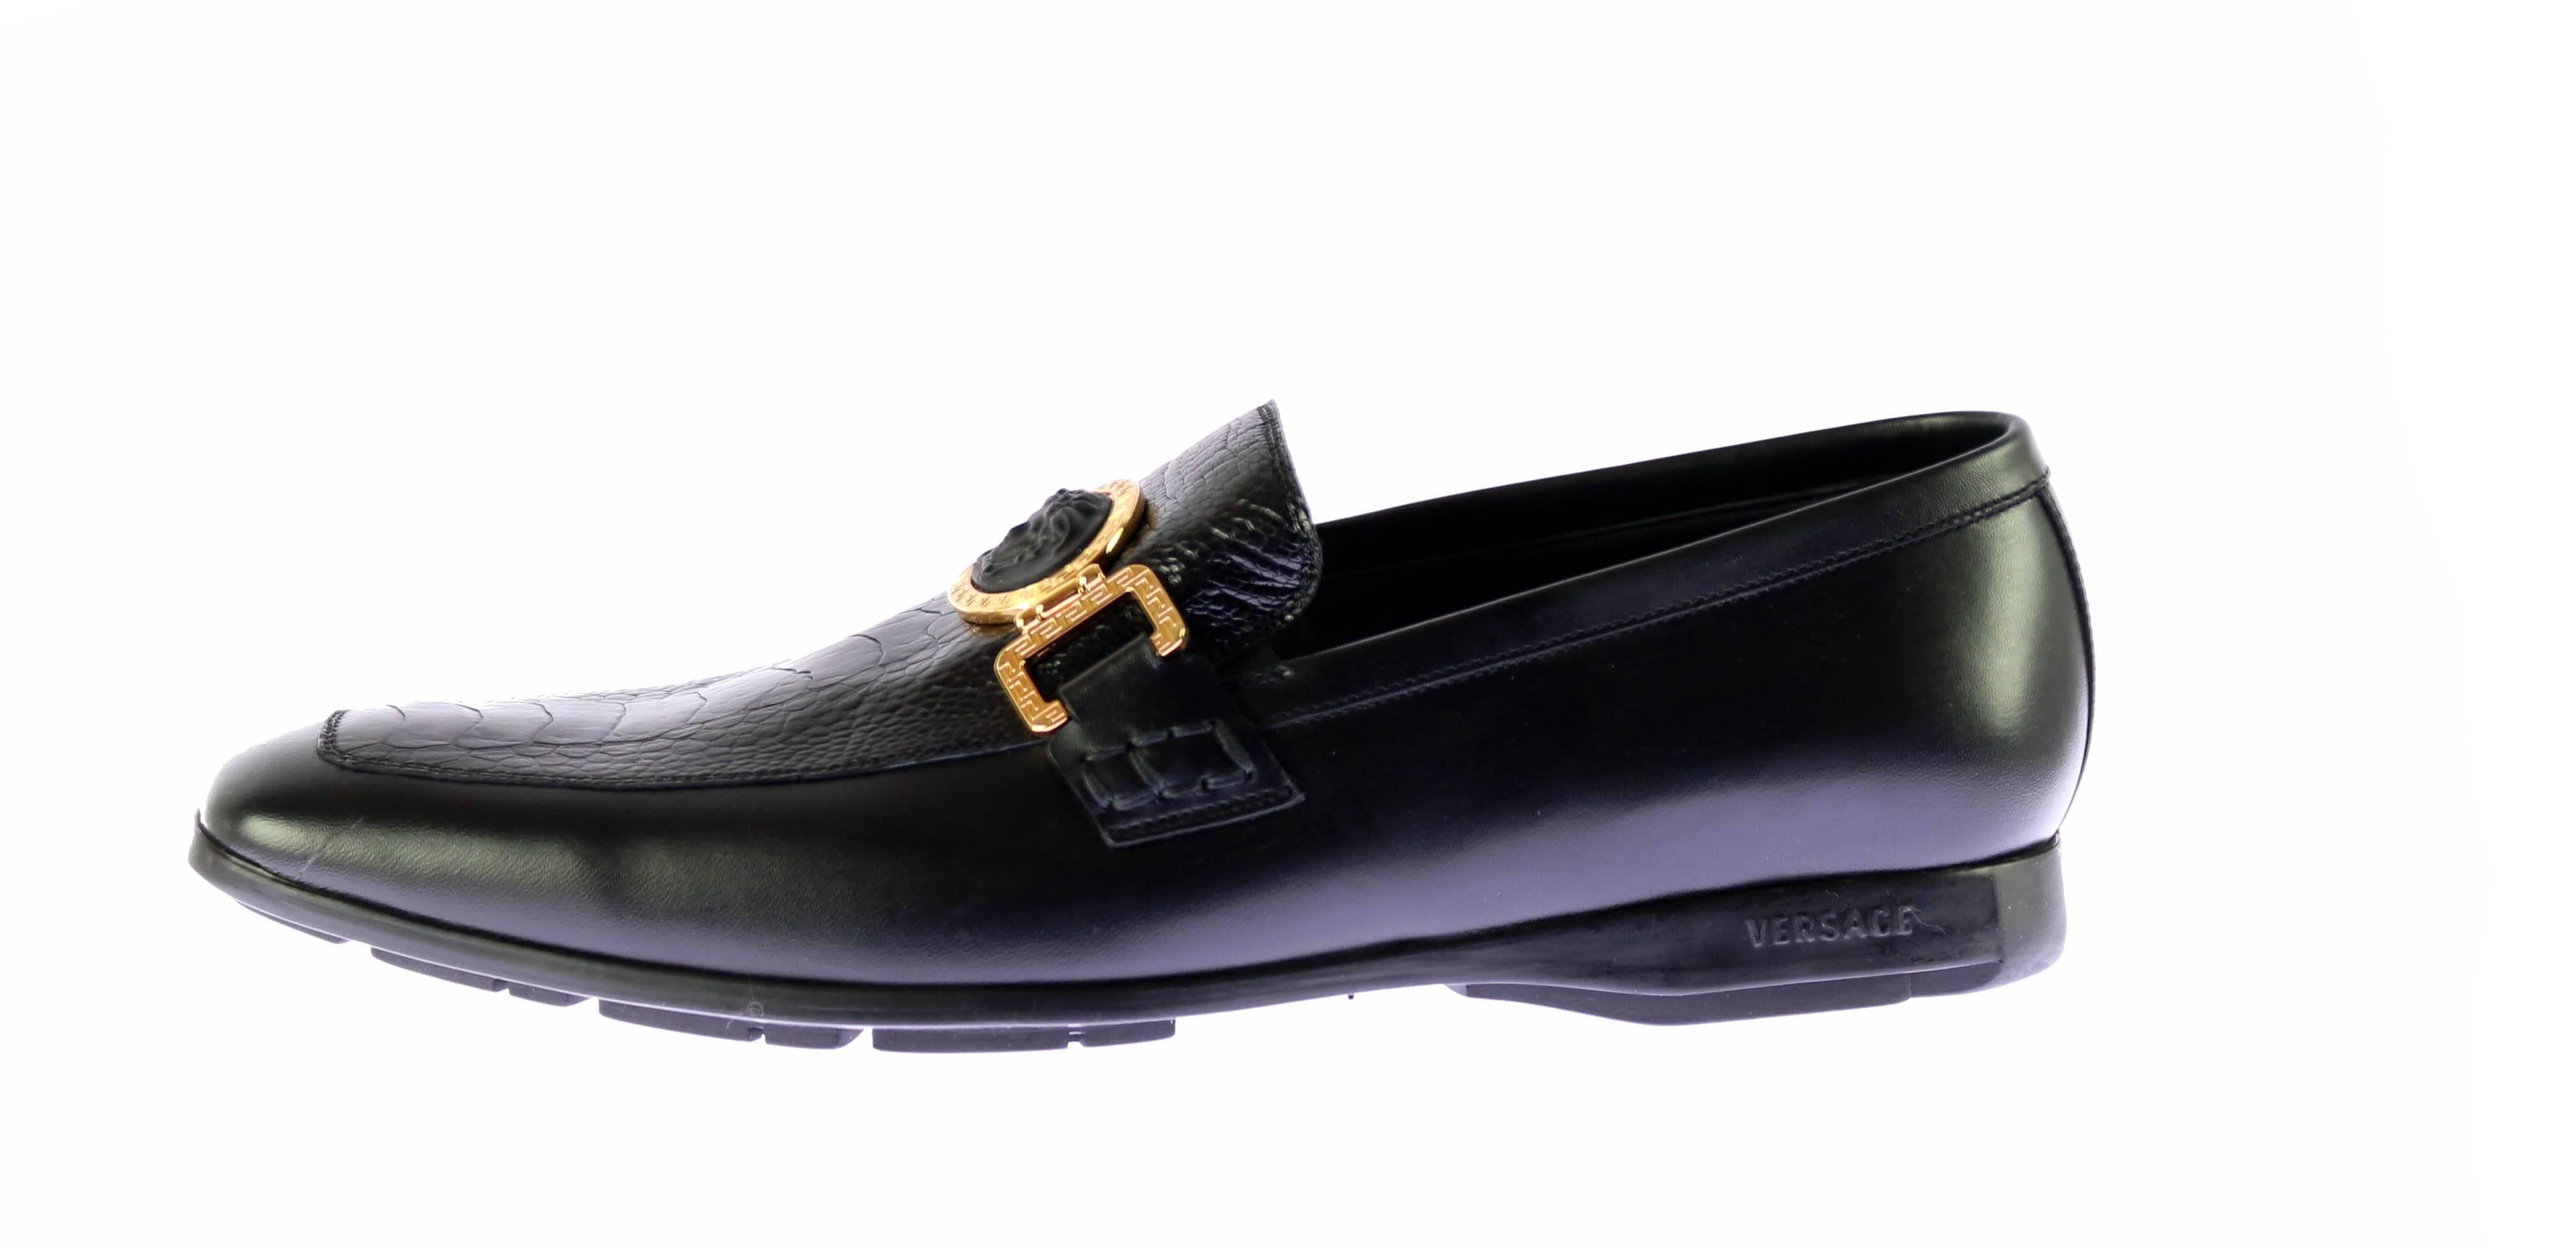 BRAND NEW 

VERSACE

City Shoe

Both casual and chic, these loafers are a great alternative to sneakers when off-duty.
      
Rubber sole loafers

Signature gold-tone buckle with Medusa, rubber sole

100% leather with ostrich detail

Lining: 100%